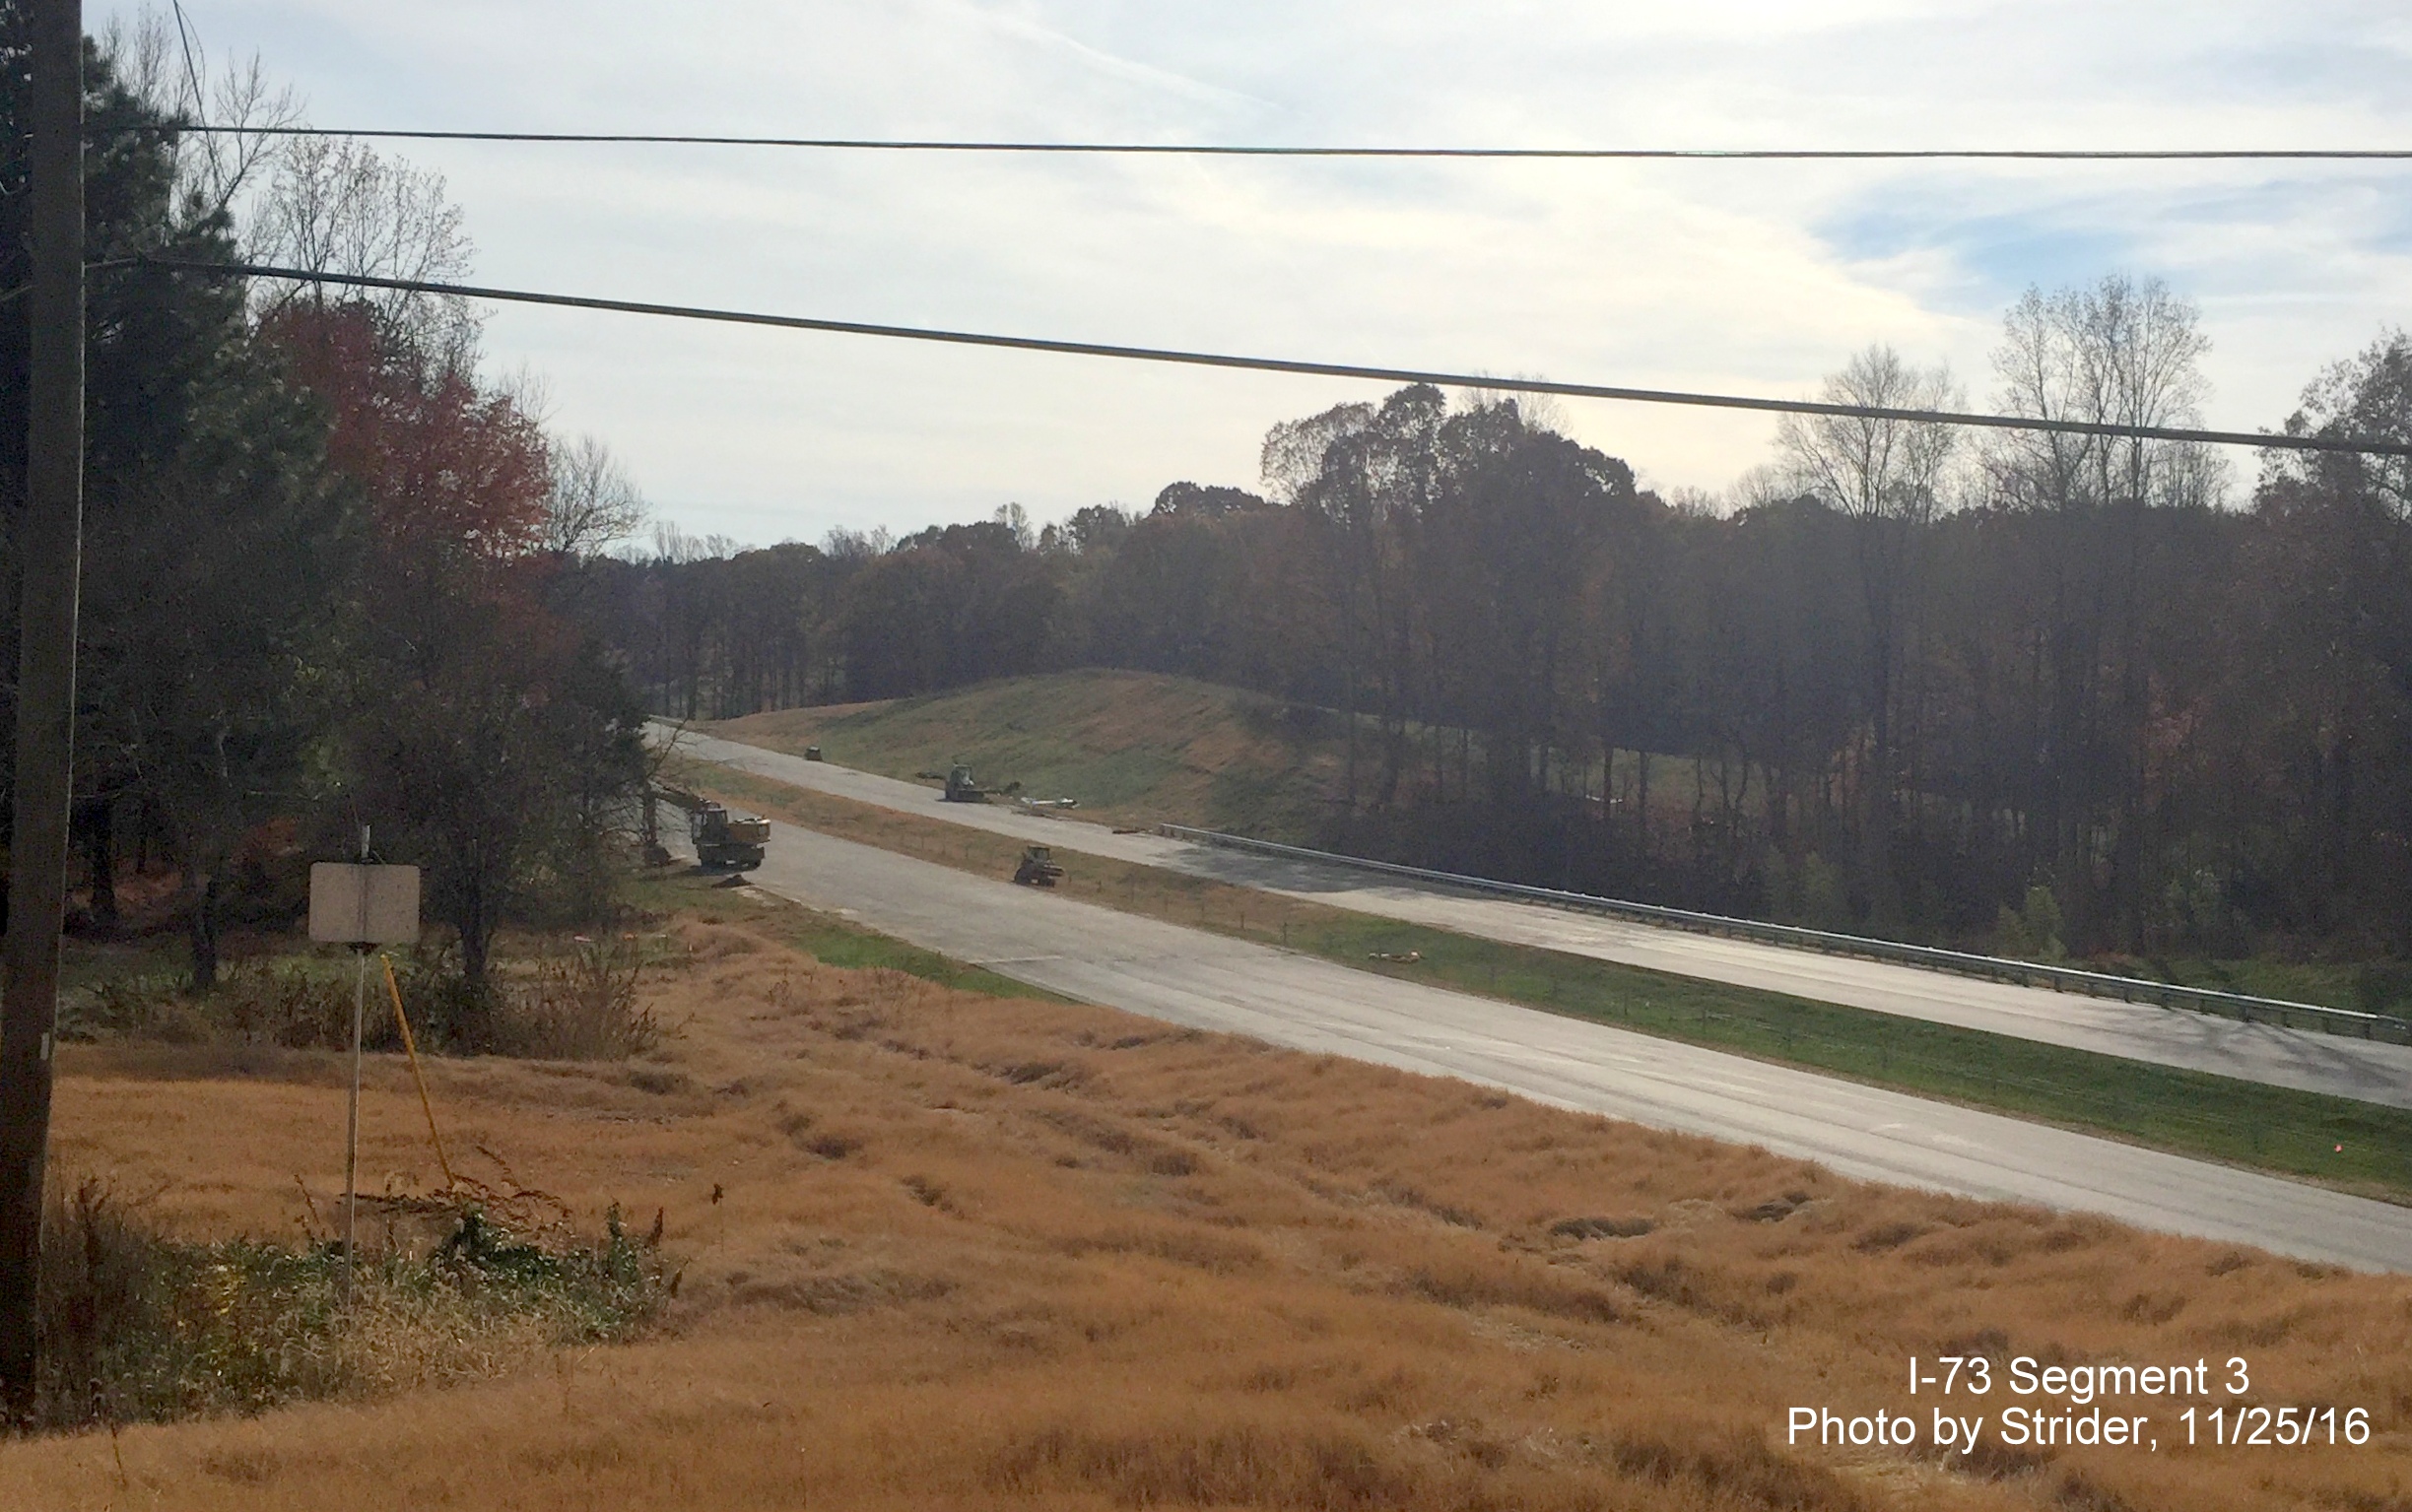 Image of view looking south from Alcorn Road showing paving progress on future I-73 lanes, from Strider